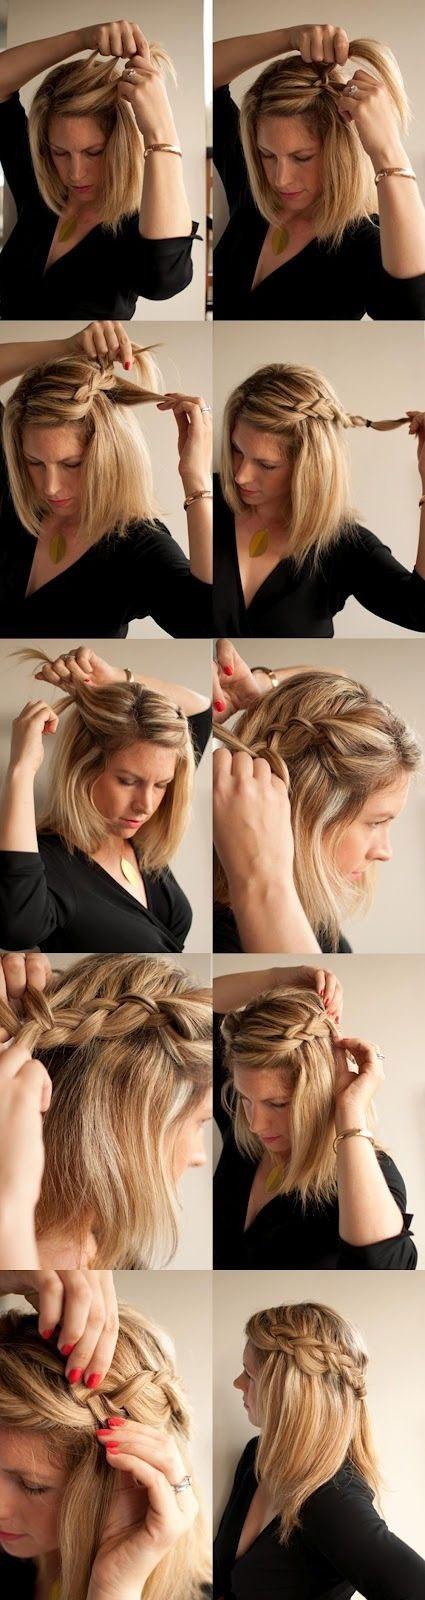 Quick hairstyles shoulder length hair quick-hairstyles-shoulder-length-hair-83_18